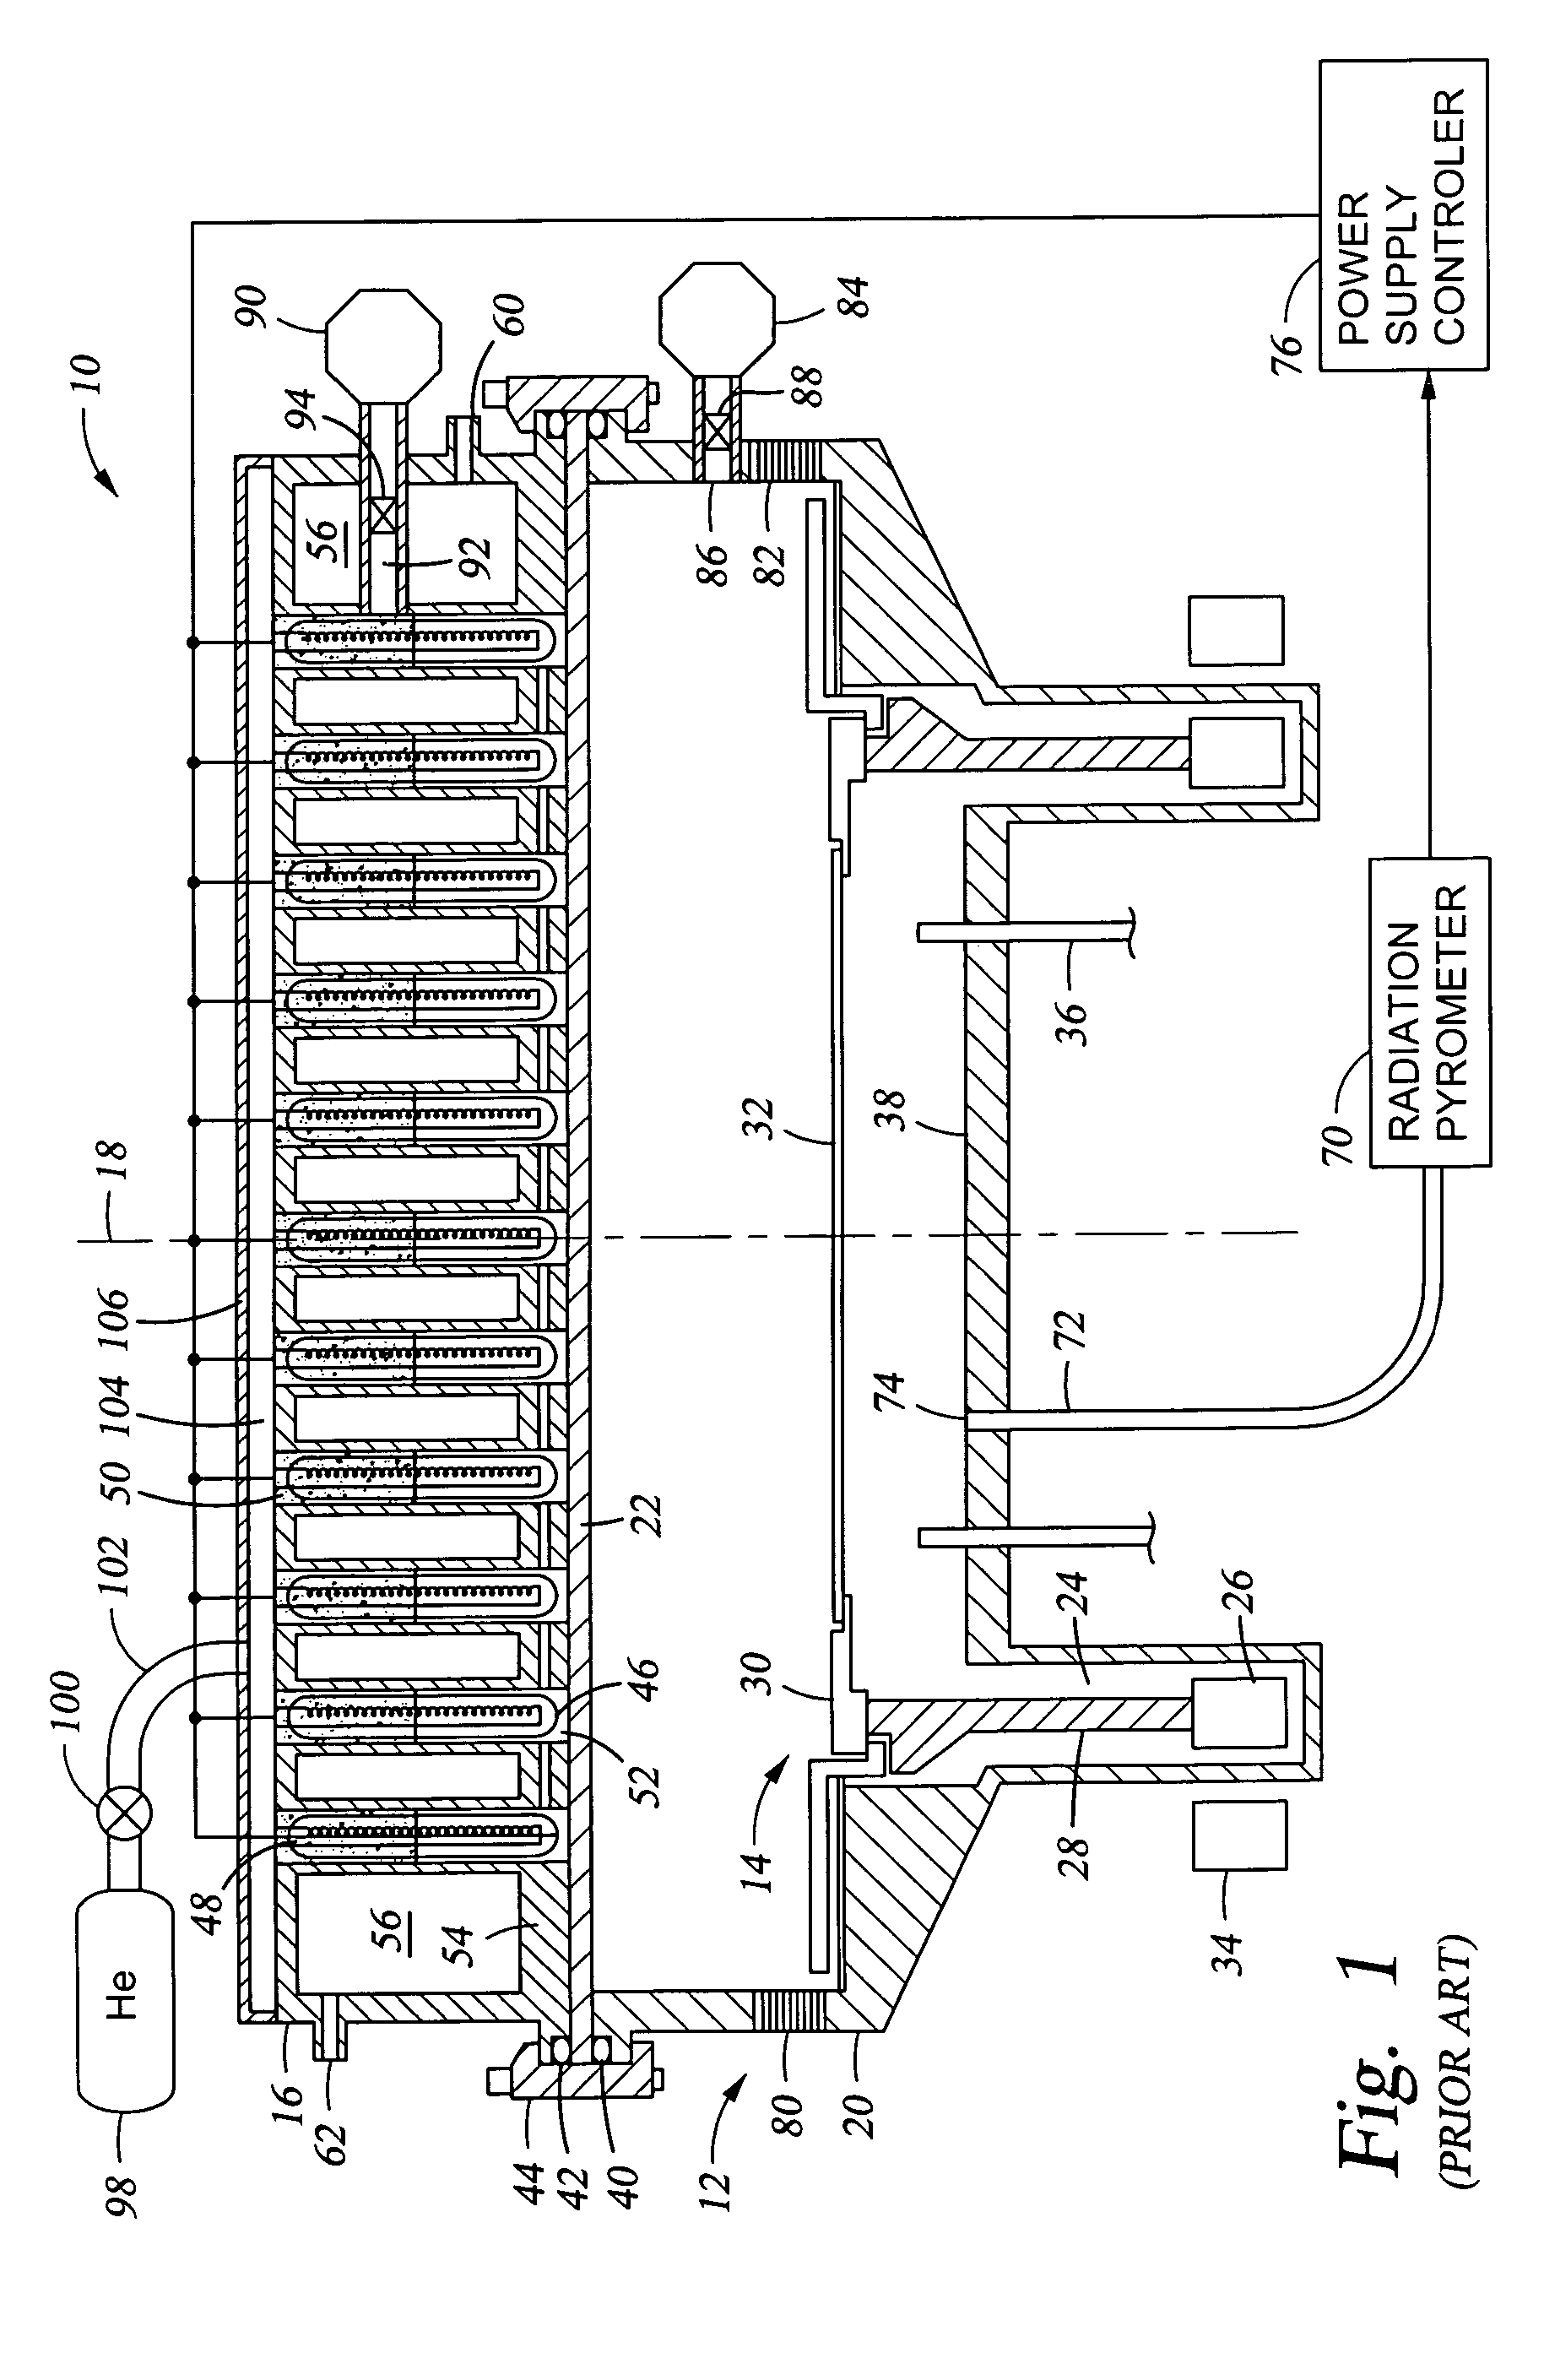 Method and apparatus for low temperature pyrometry useful for thermally processing silicon wafers